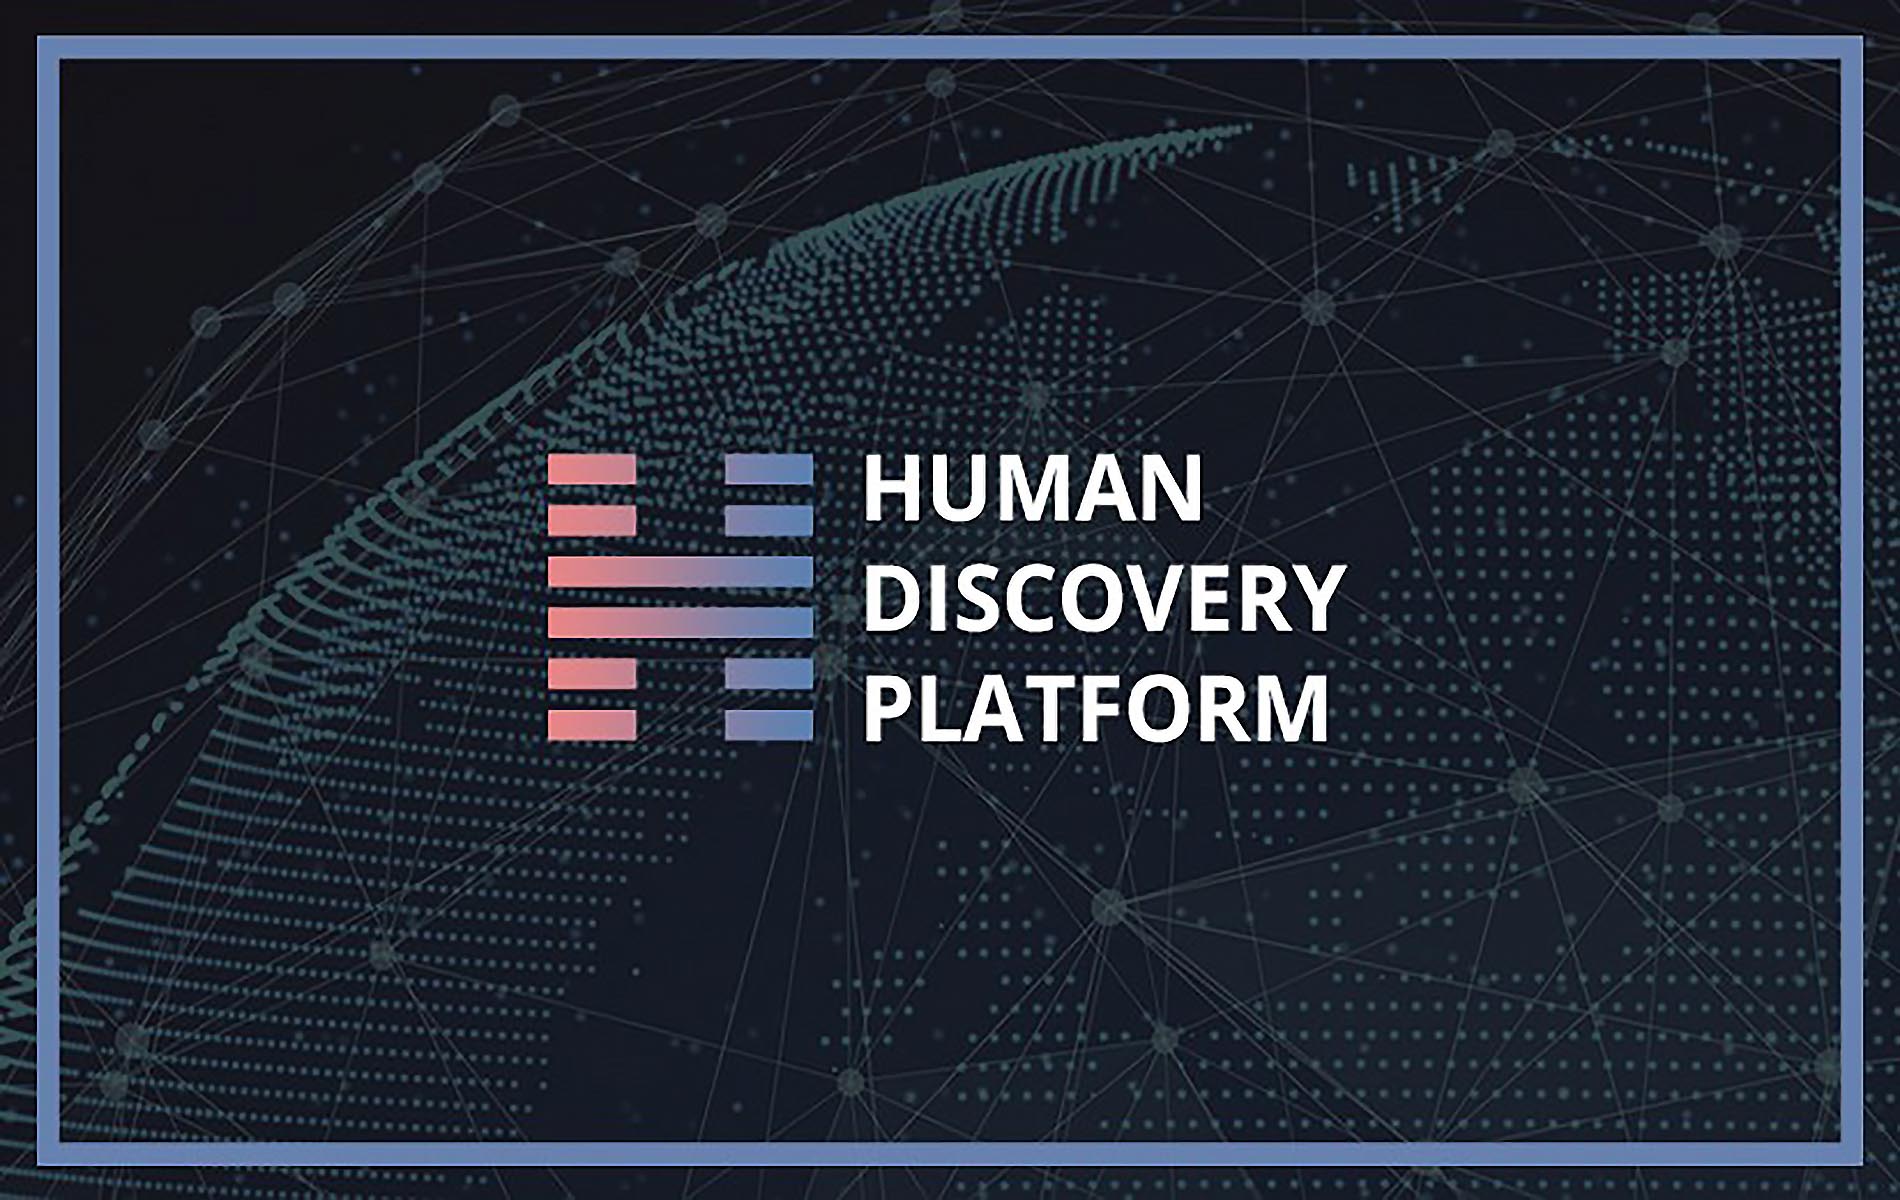 Human Discovery Platform to Hit the Self-Improvement and HR Markets